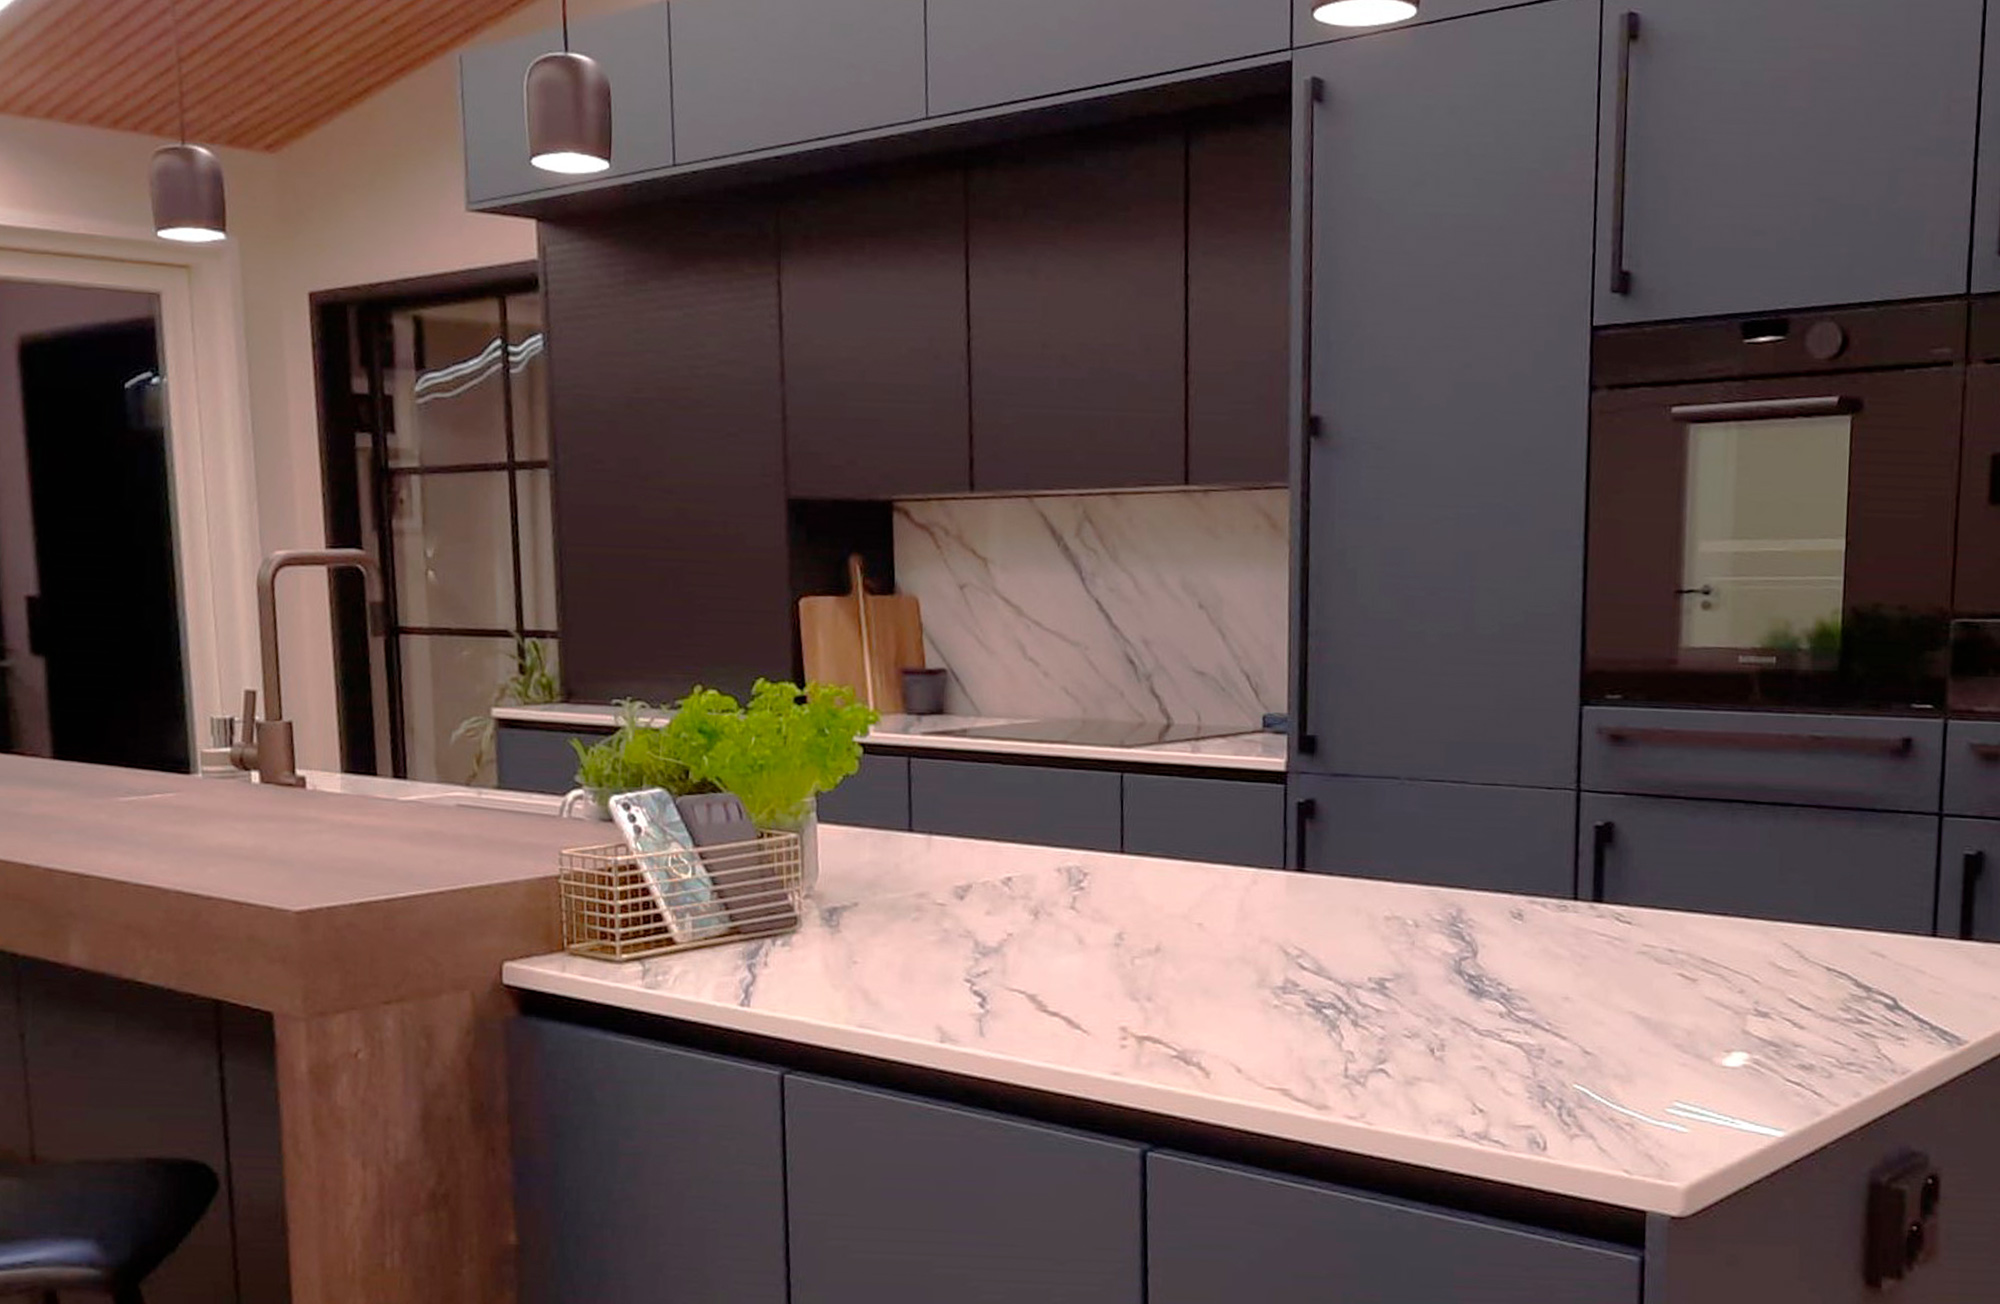 Image of Saana Mantere 1 1 in The kitchen of a popular couple with Dekton showing its best side - Cosentino